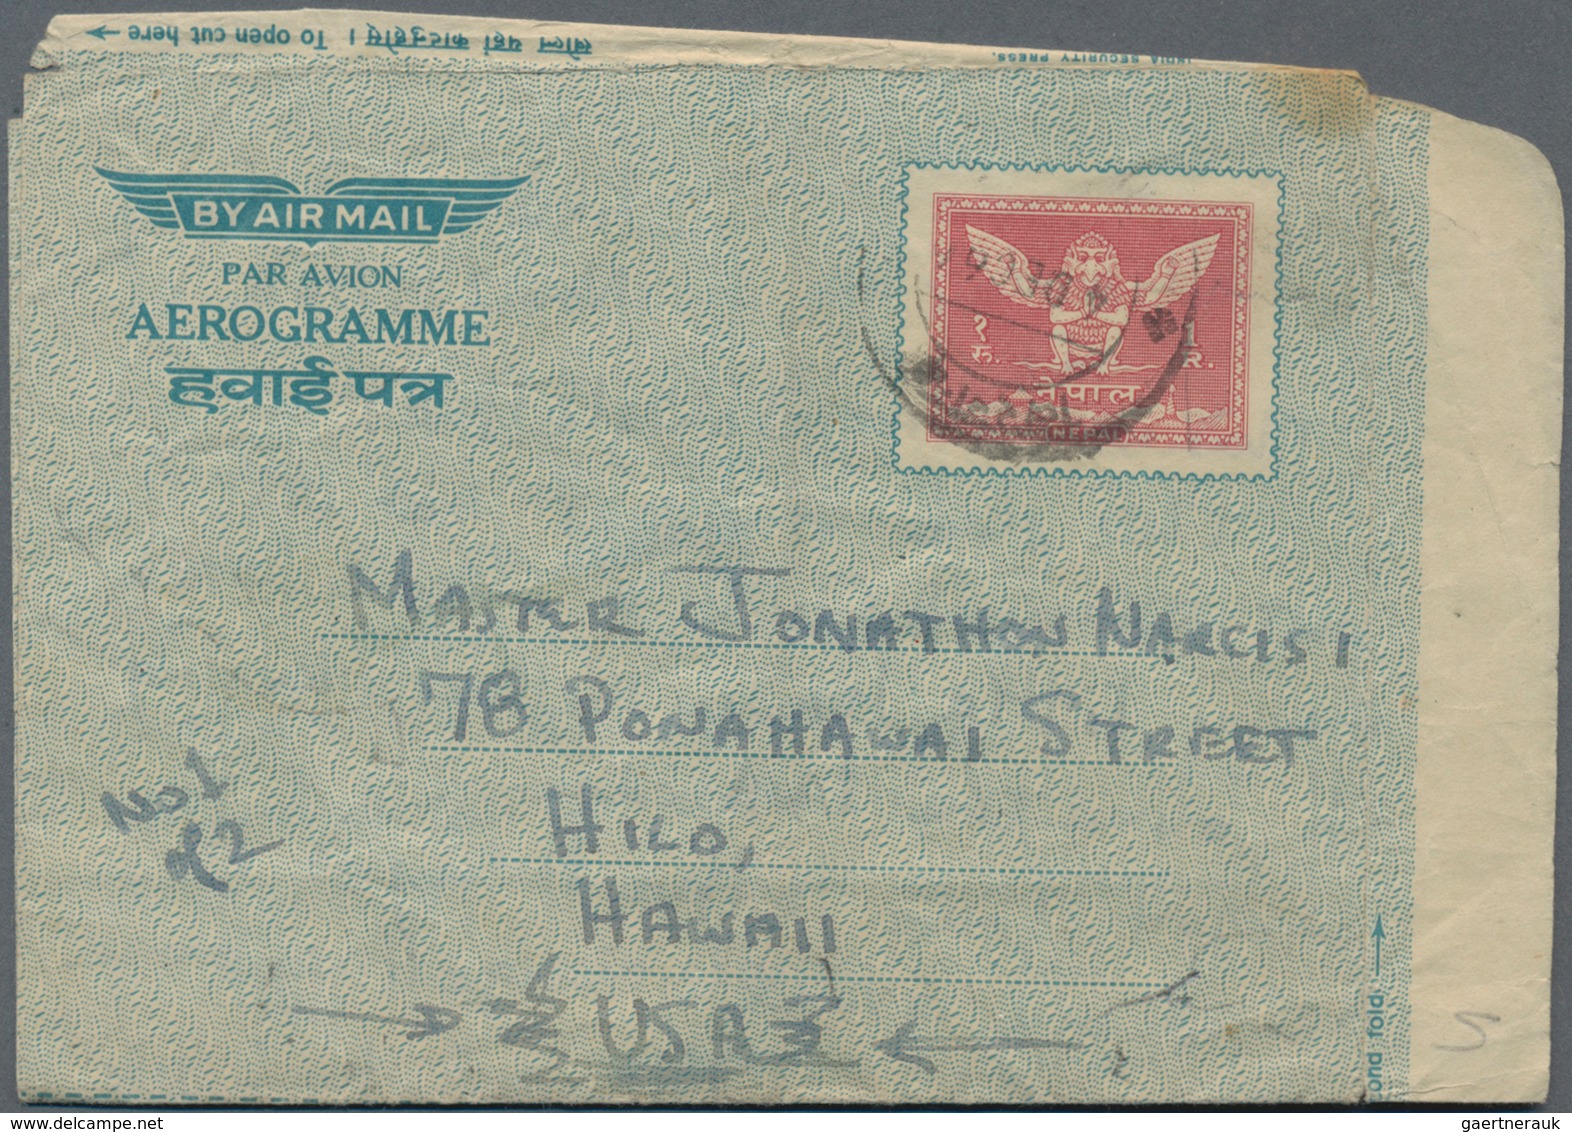 Nepal: 1946-1970's: Collection of about 60 Aerogrammes, all used, from three Indian air letter sheet